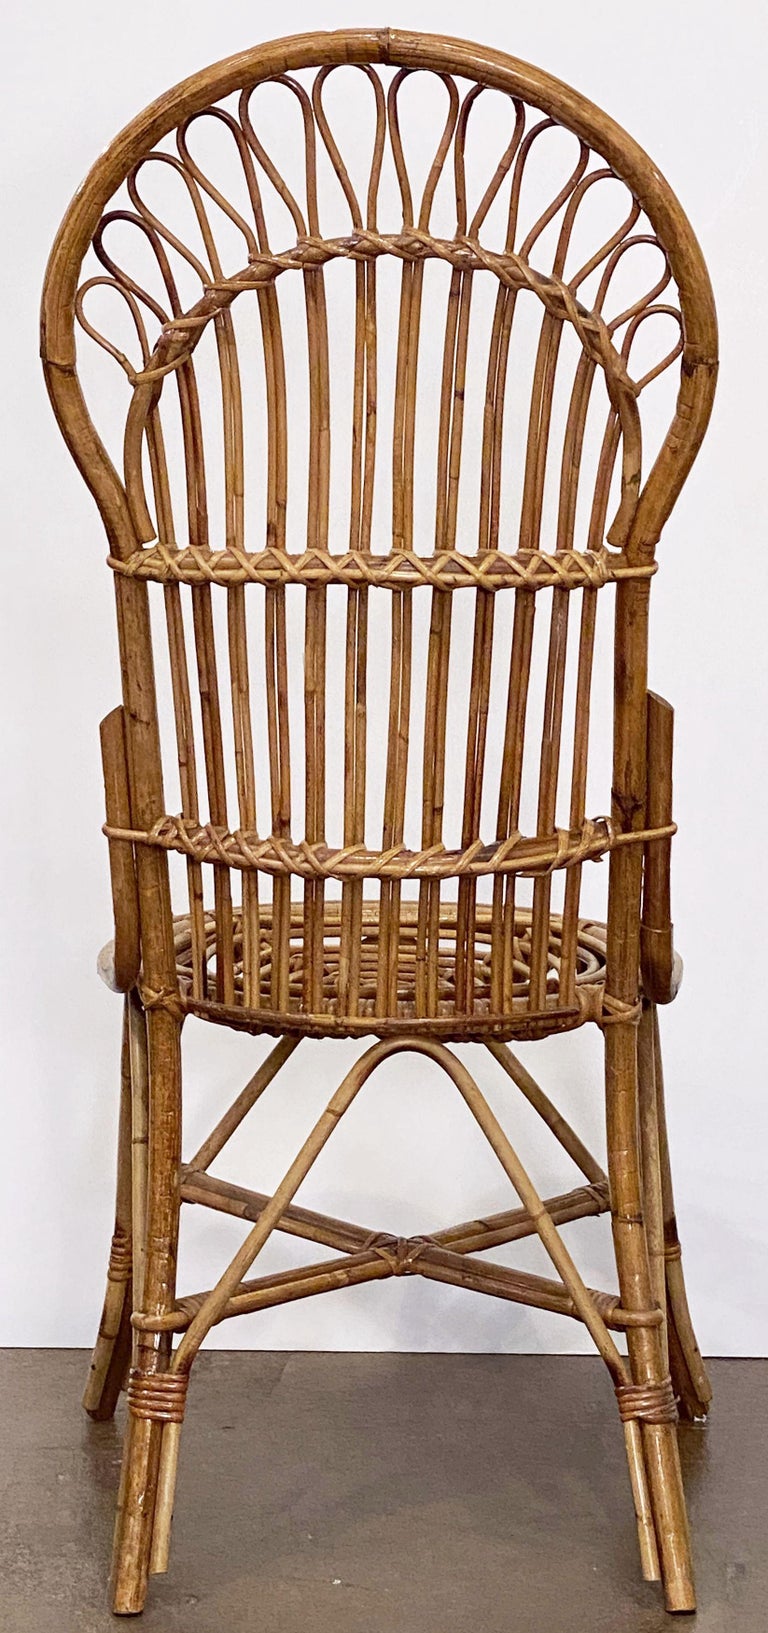 cc587_rattan_chair_1_of_2_118__master